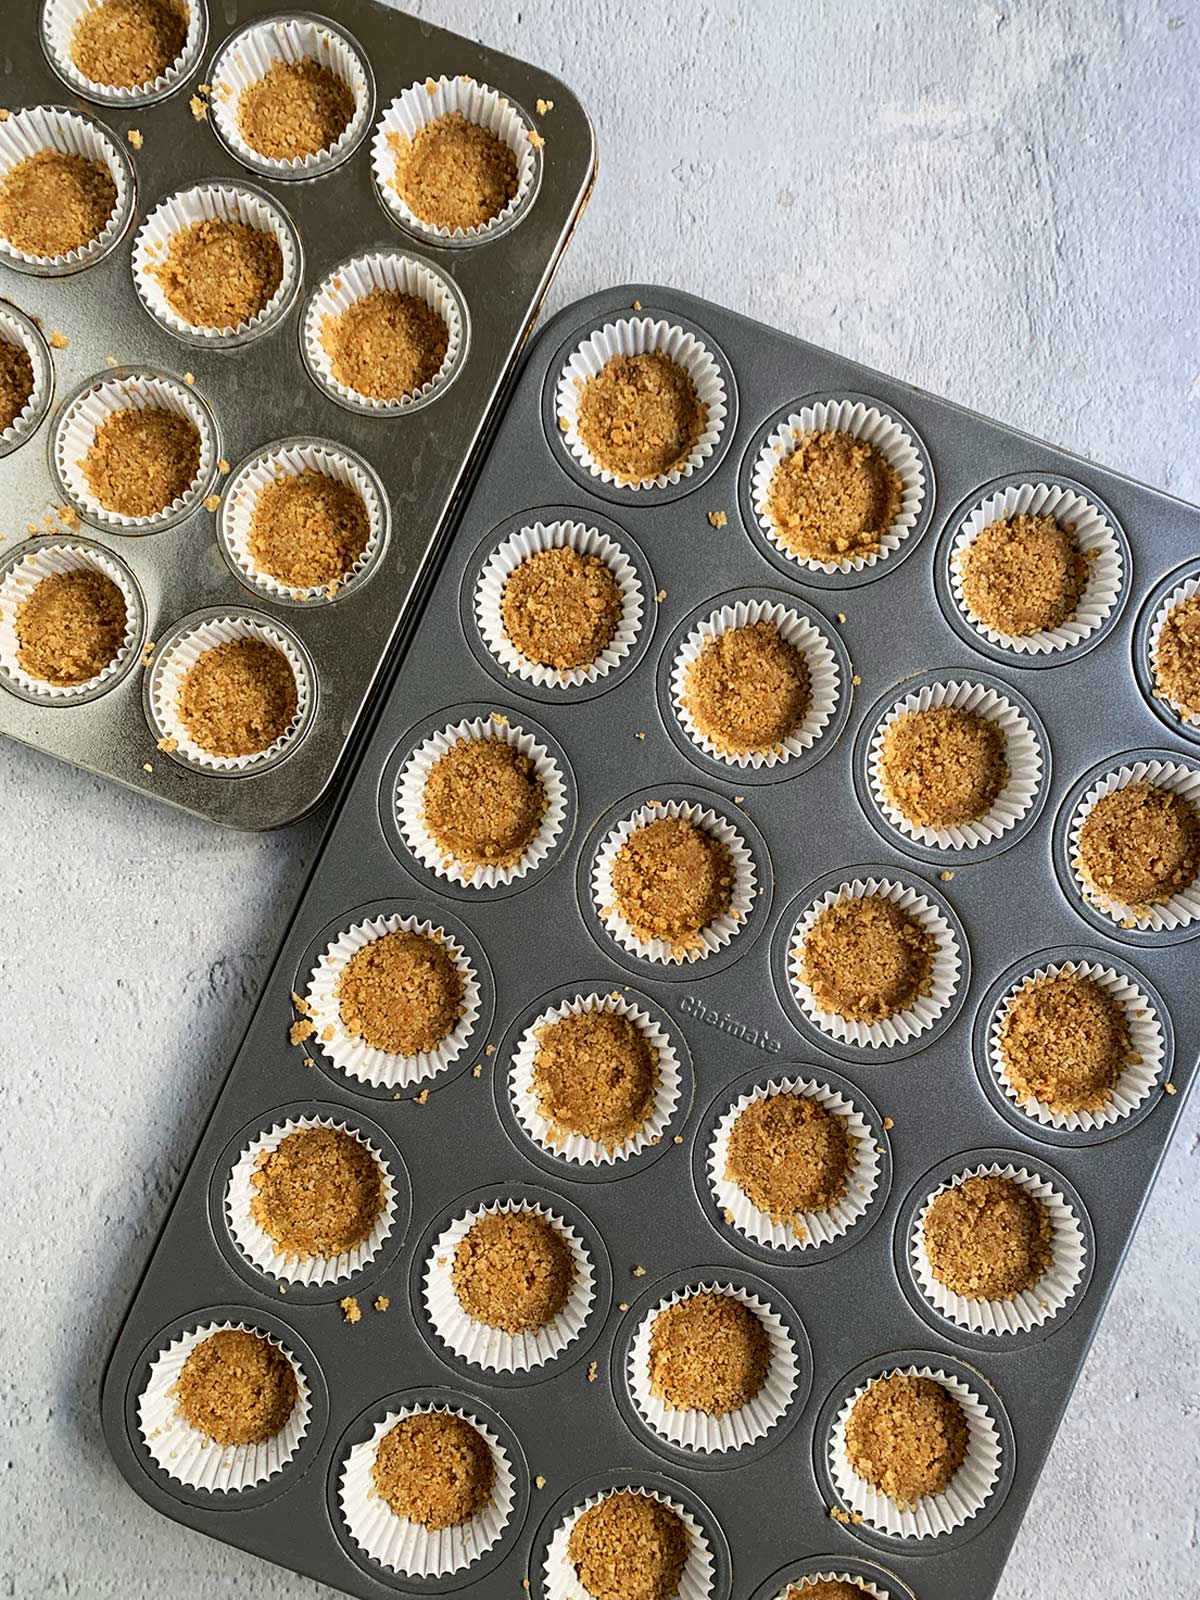 Two pans of mini cheesecakes bites waiting for the crust to be baked.